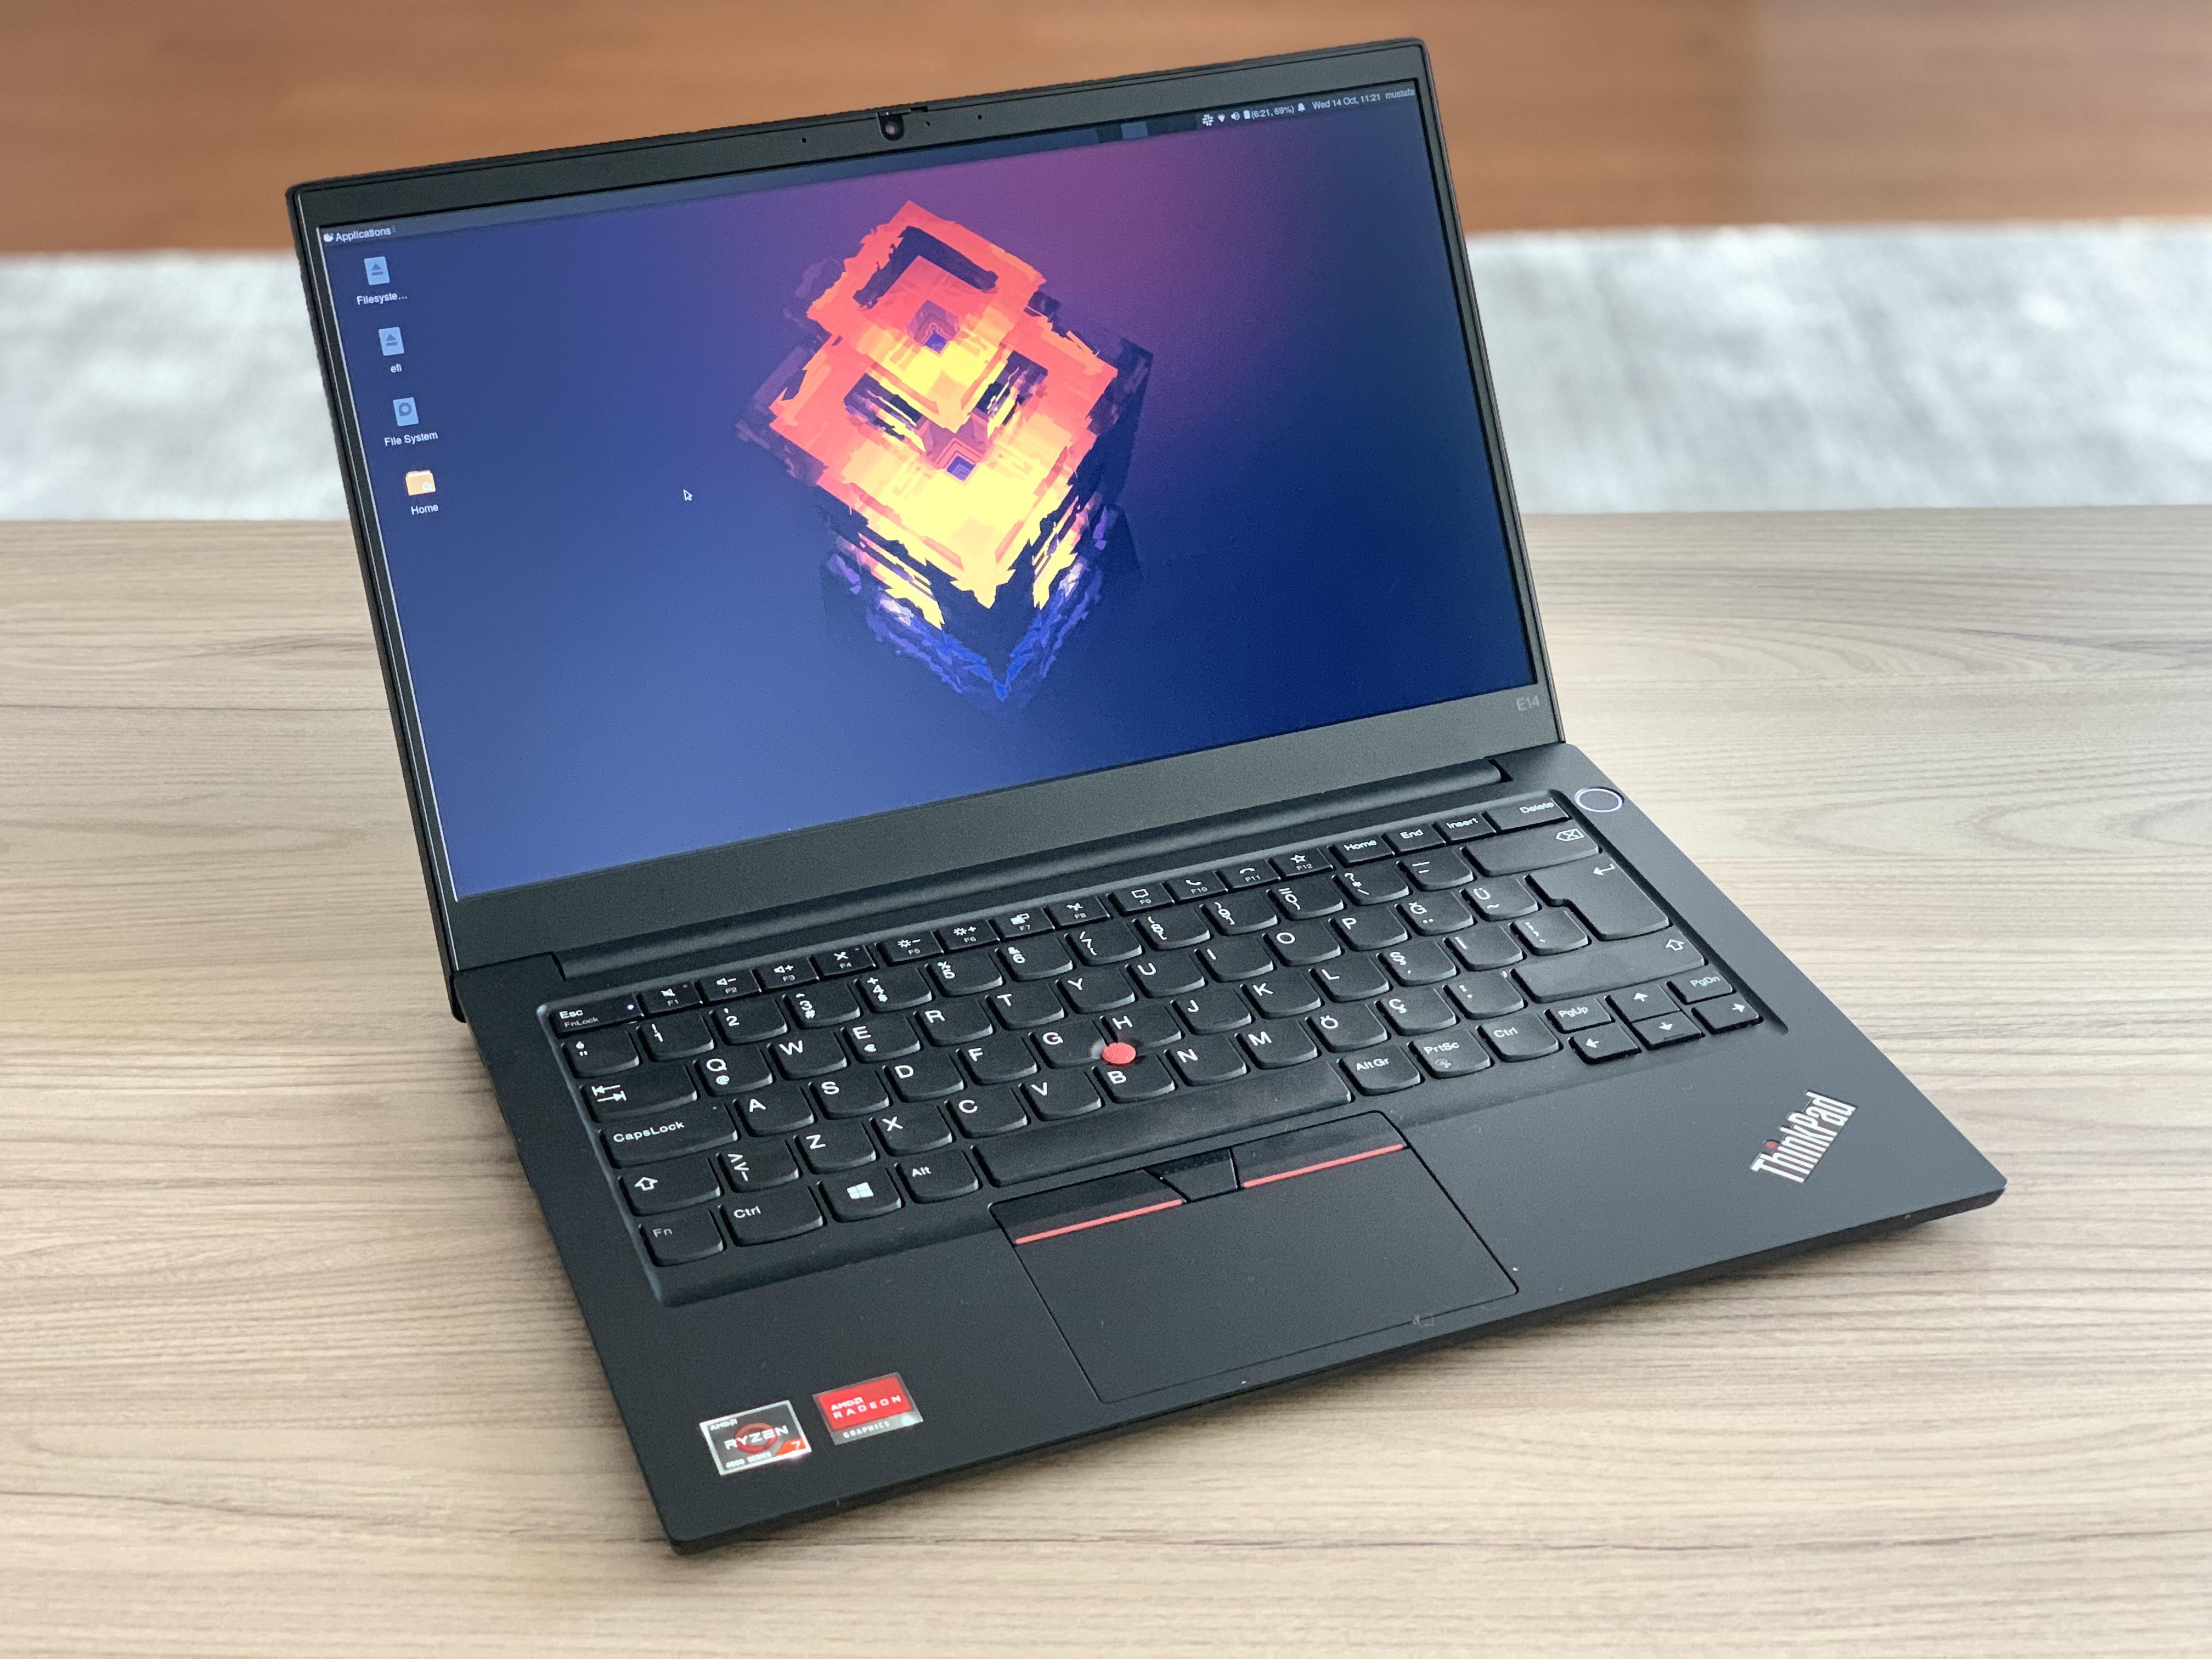 Lenovo thinkpad p51 mobile workstation with intel vpro quad-core i7-6820hq up 3.6ghz review